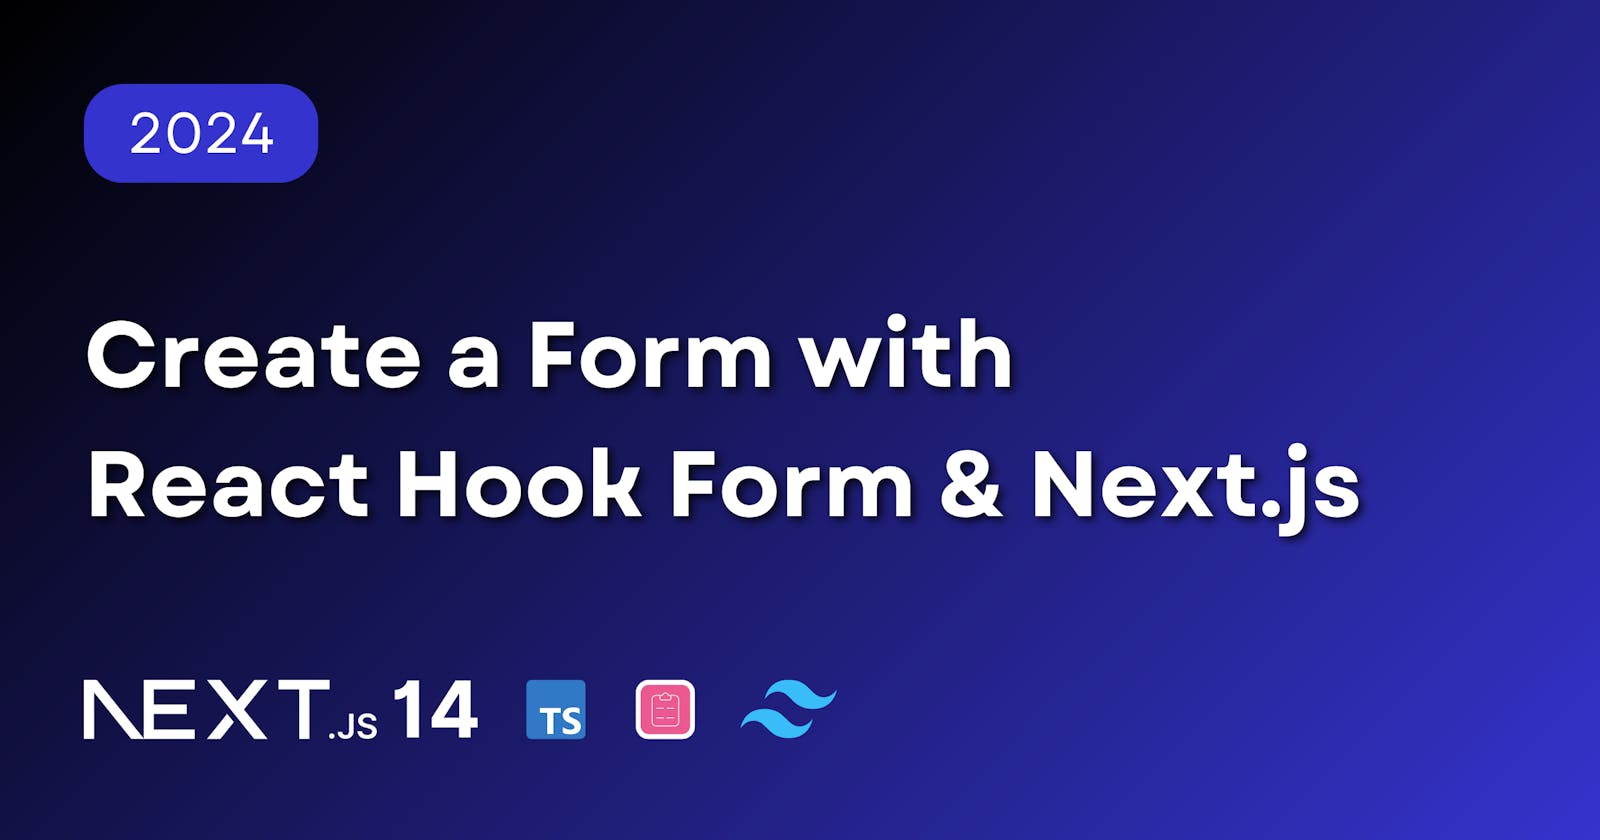 Create a Form with React Hook Form & Next.js